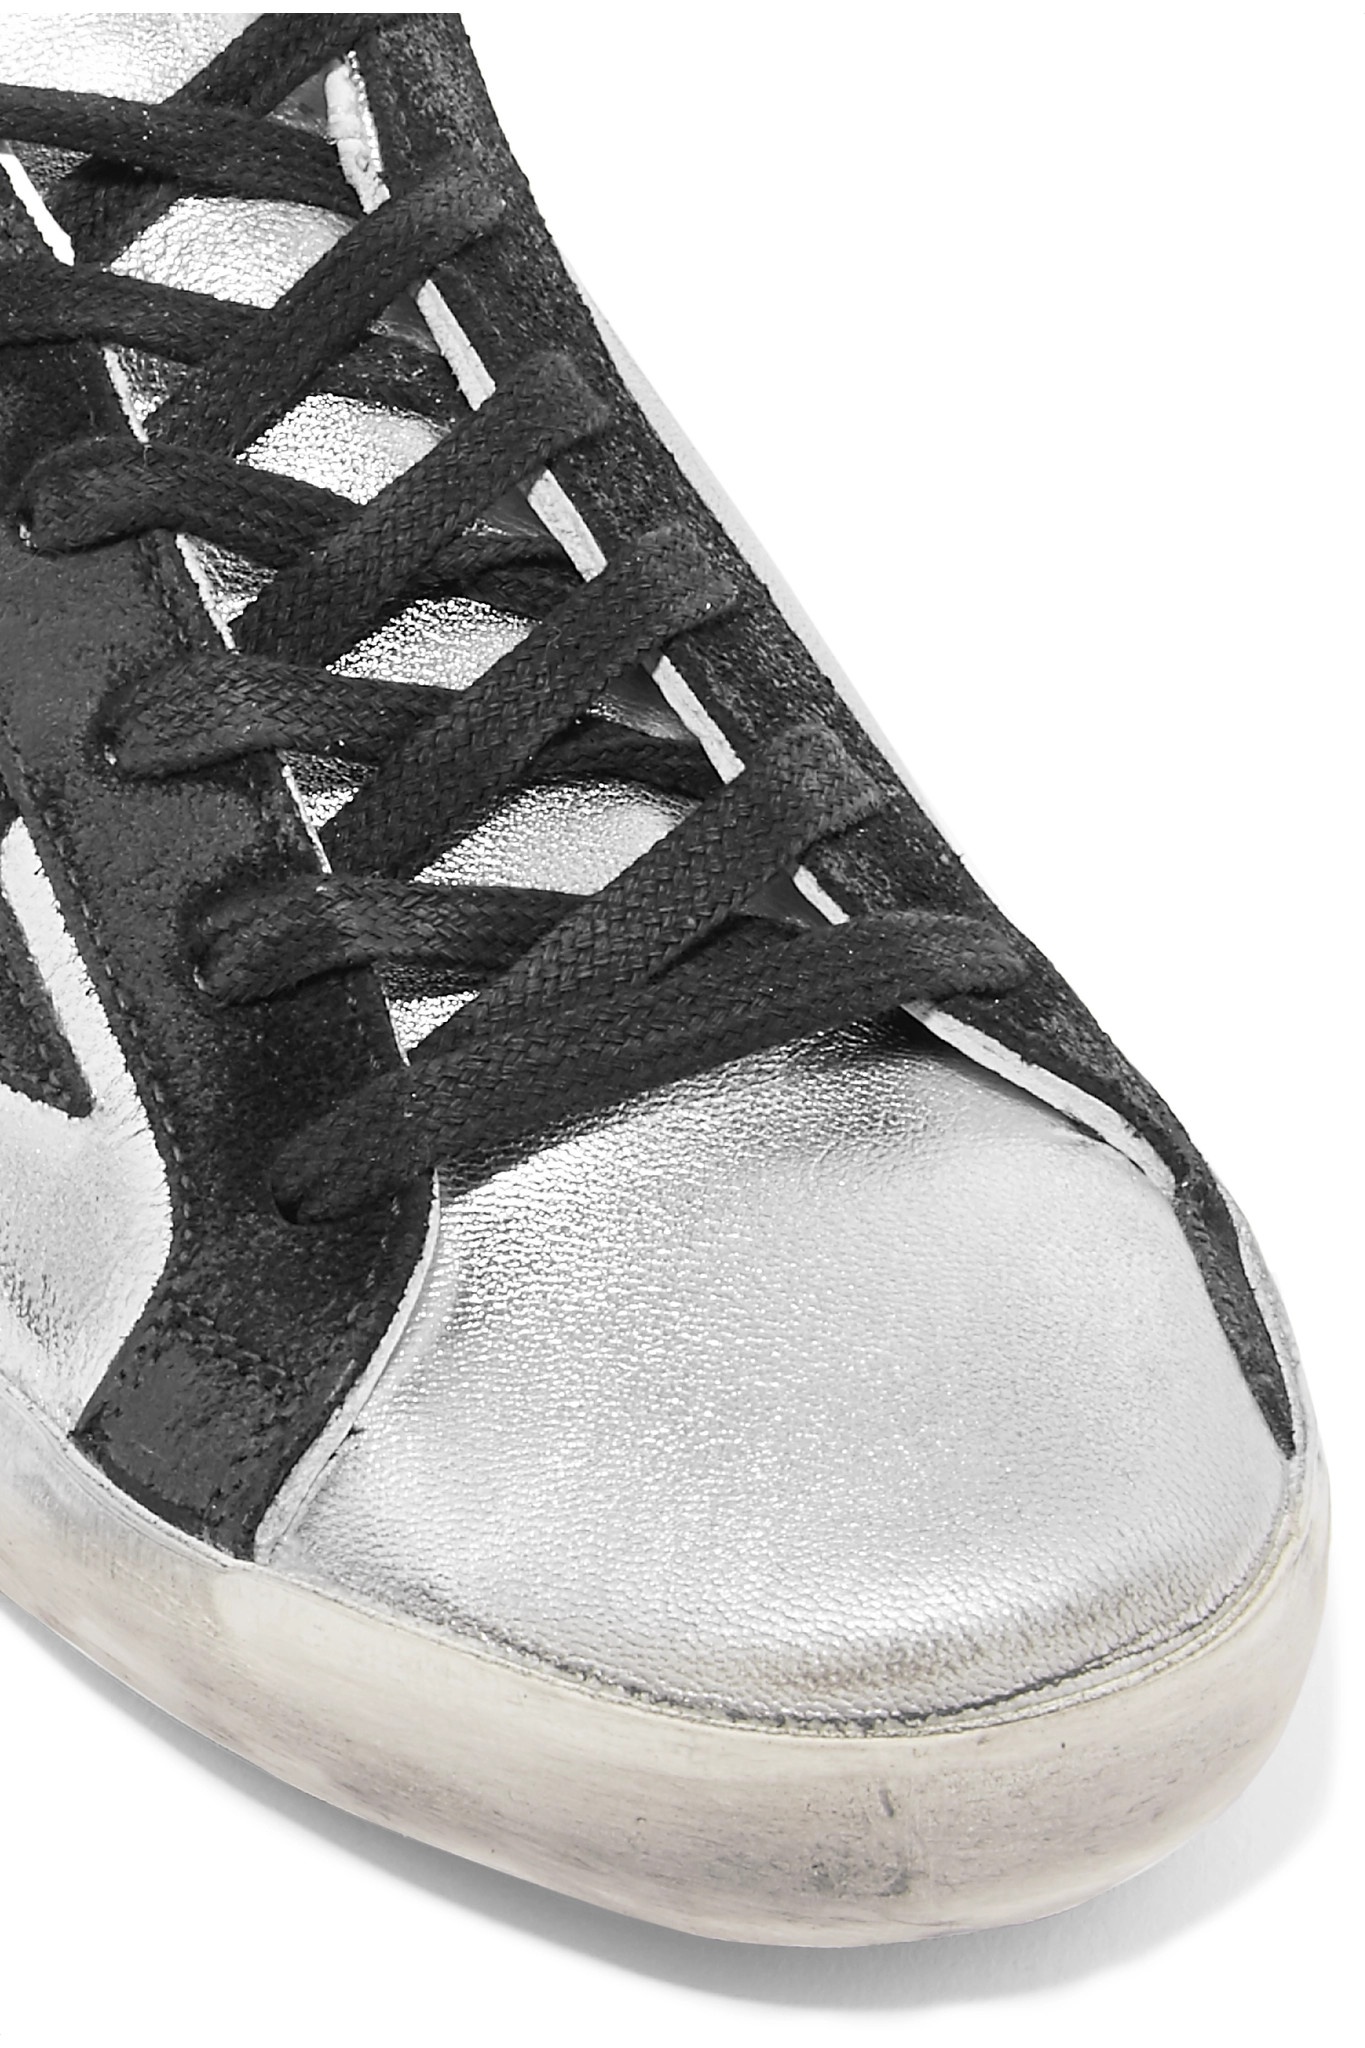 Superstar distressed metallic leather and suede sneakers - 5